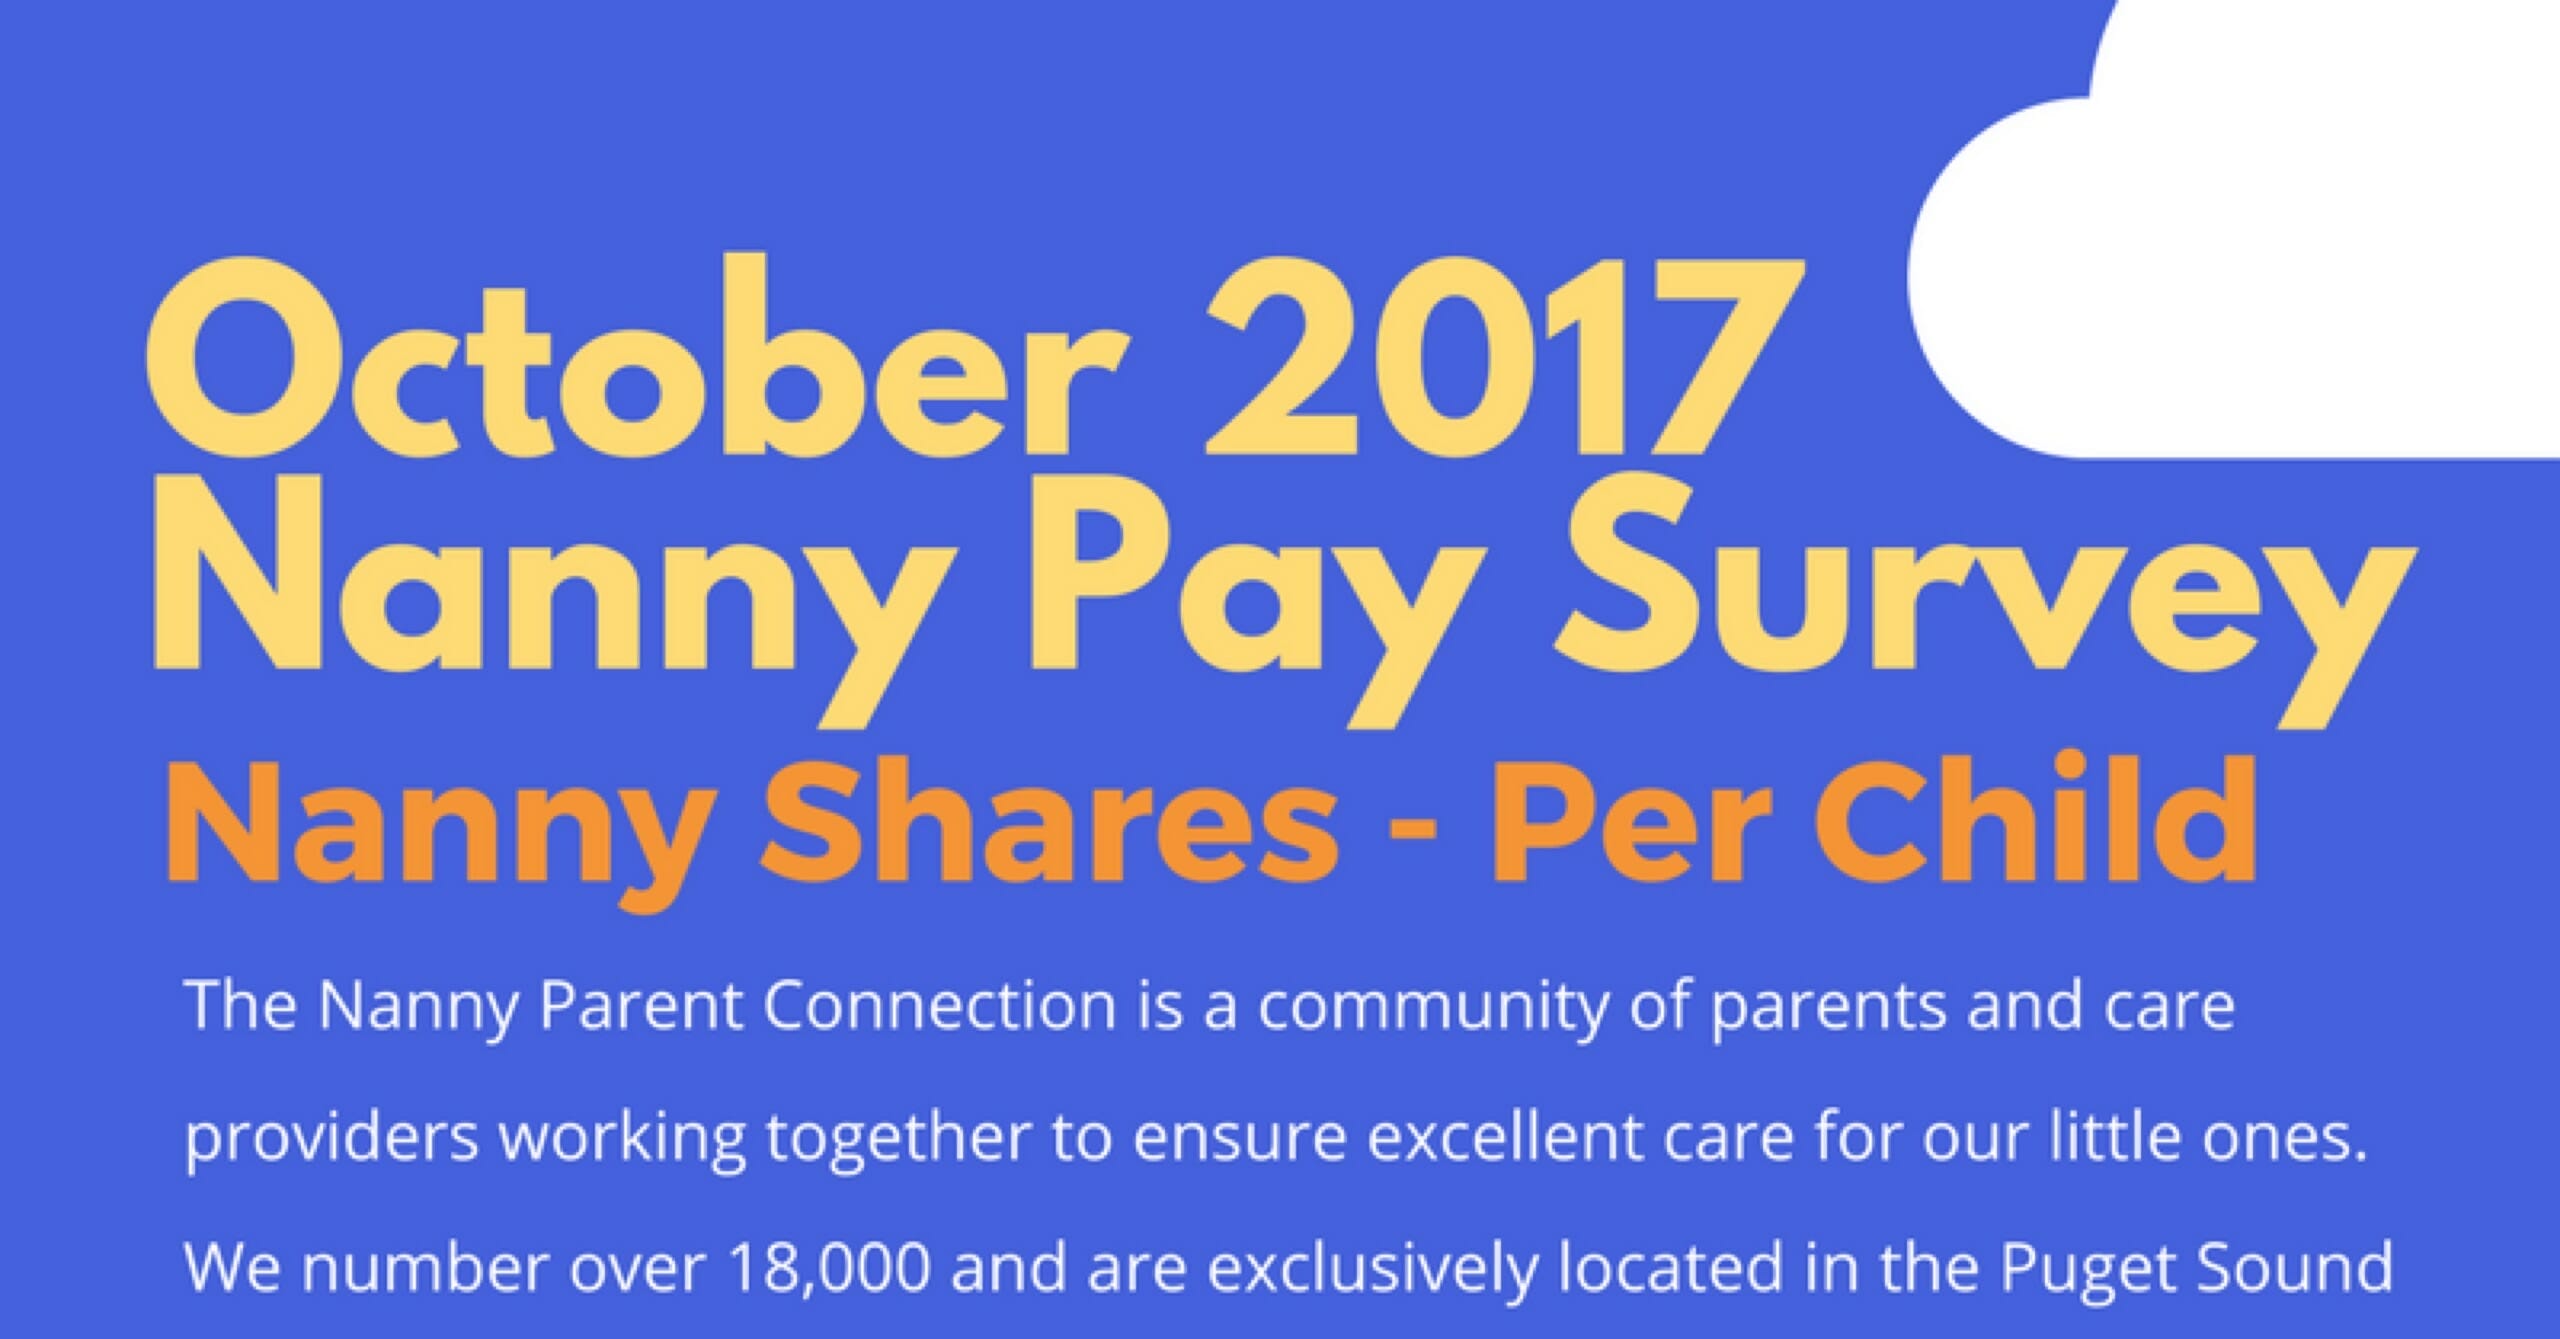 nannypay special coupons new users